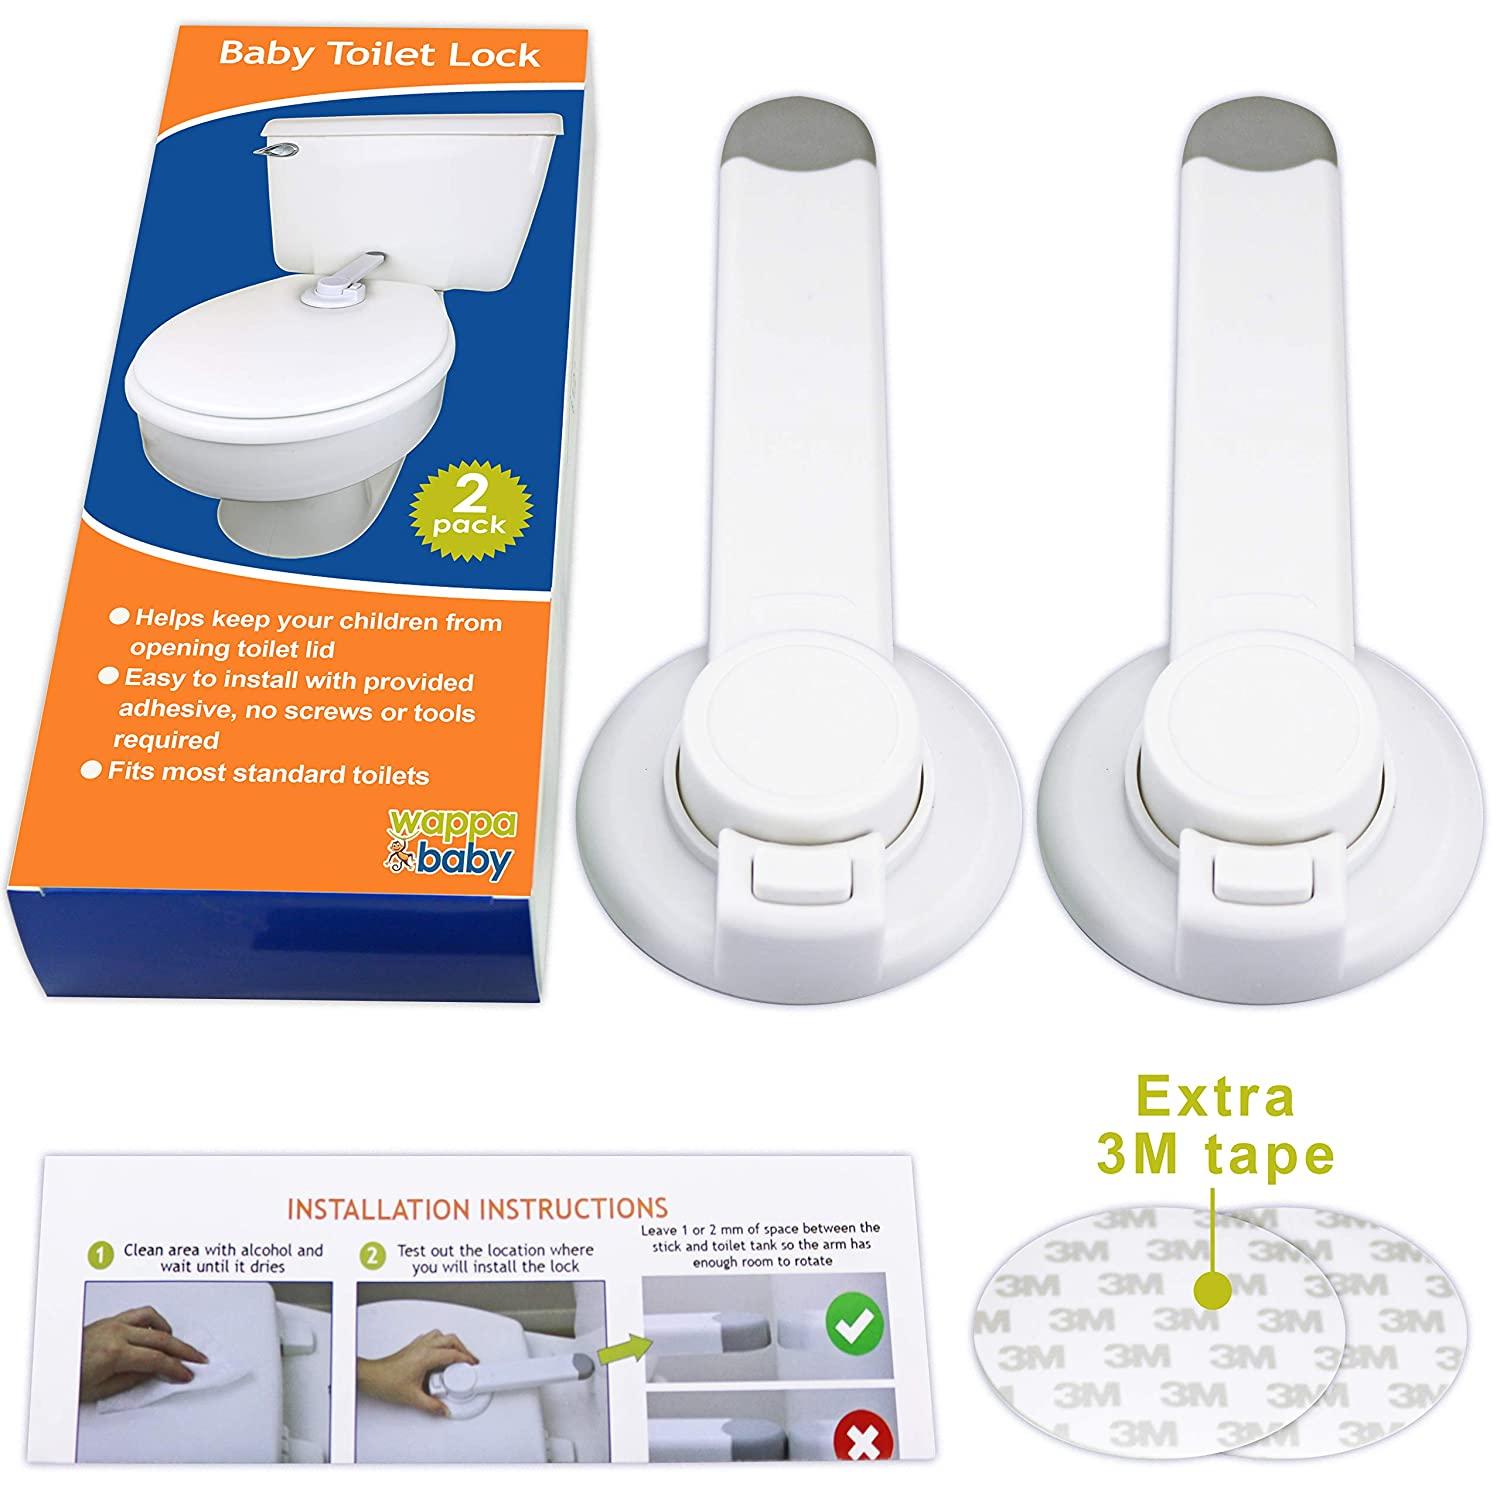 Baby Products Online - Baby toilet lock (packages) for child safety,  baby-protected toilet seat lock with 2 additional surfaces adapted to most  standard toilets, toilet lid lock for installation - Kideno